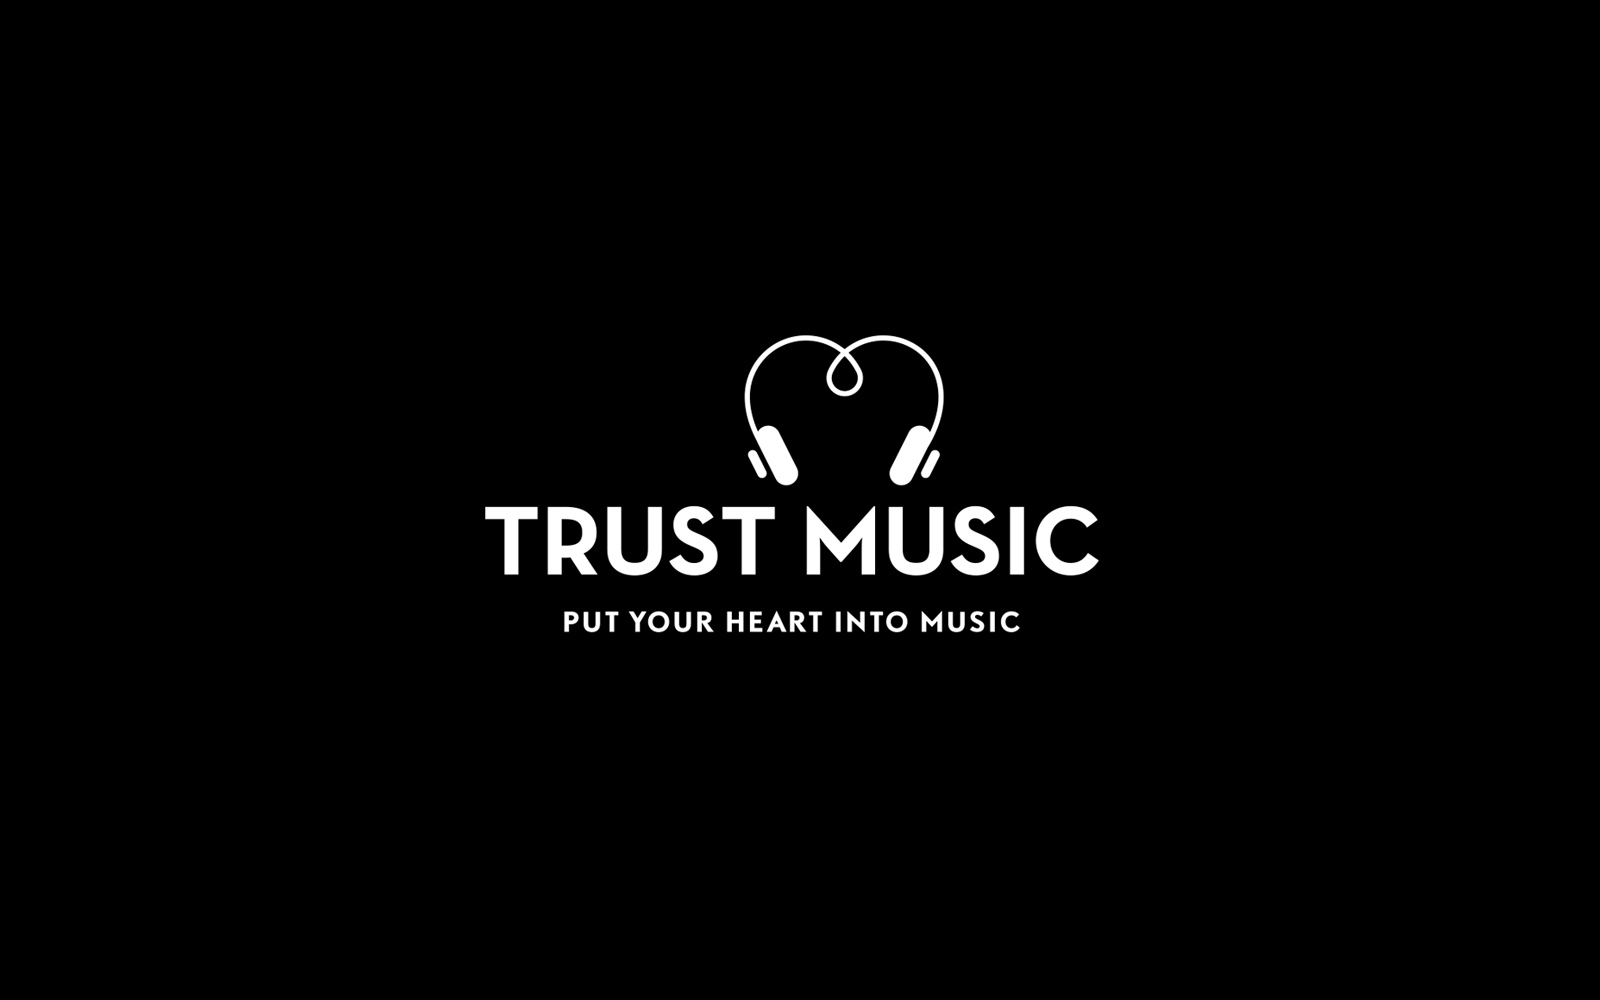 Brand positioning for Trust Music charity, putting heart into music